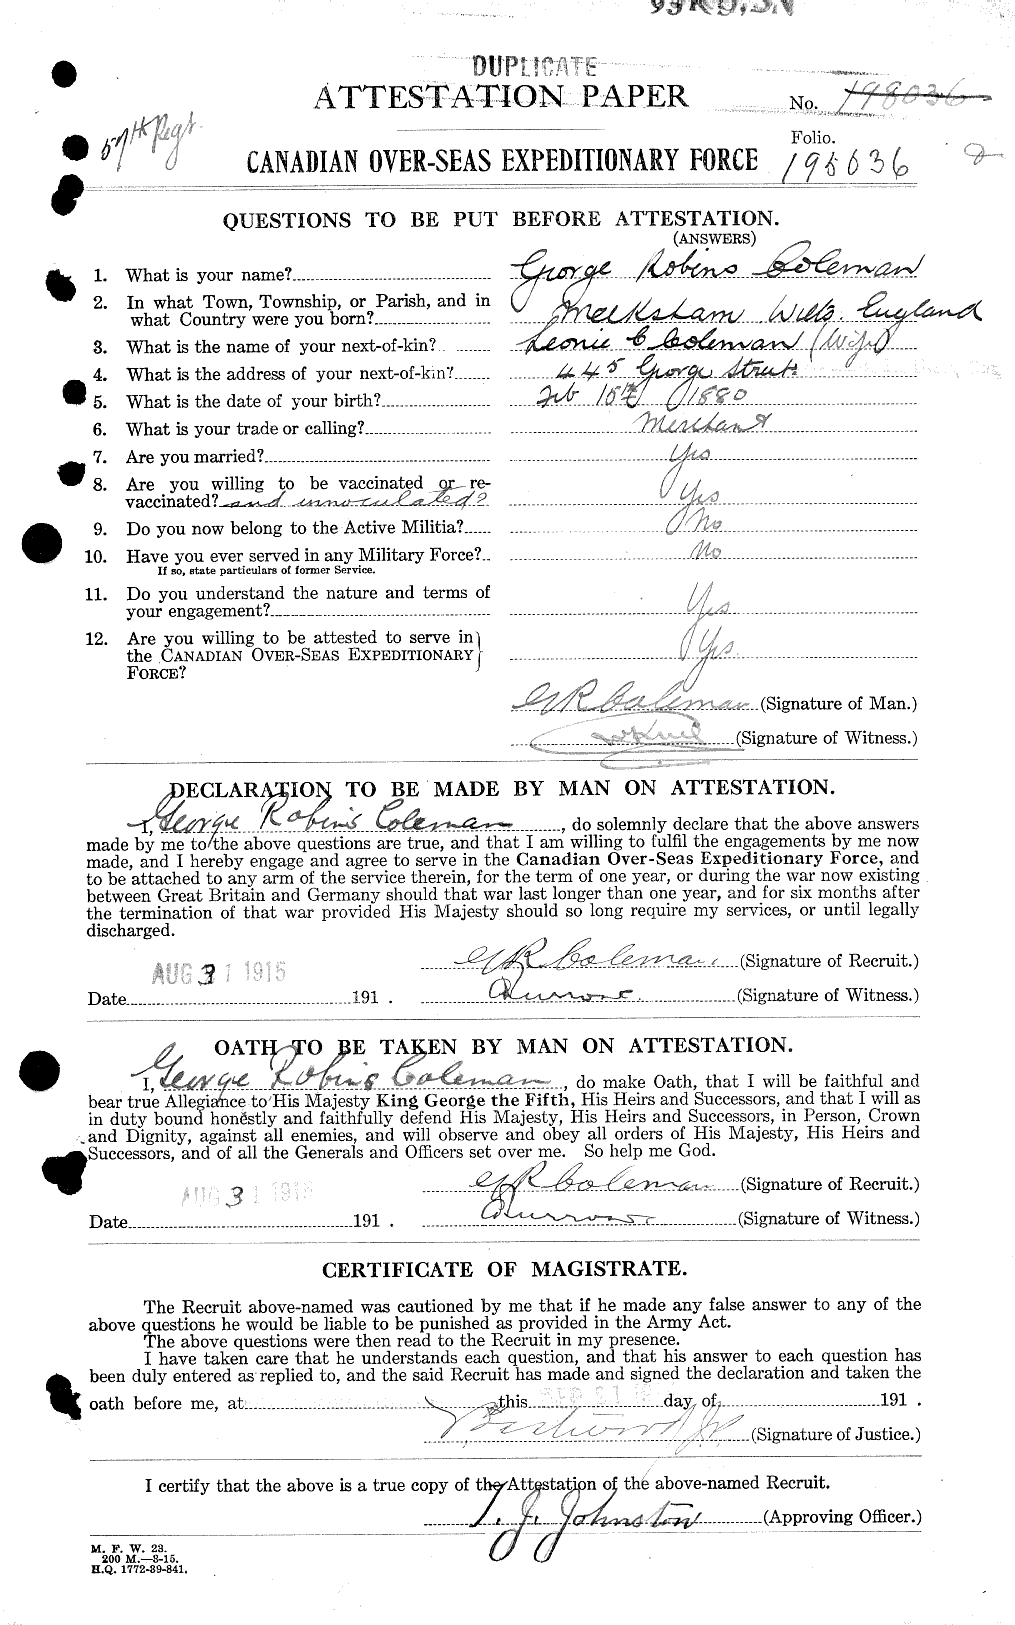 Personnel Records of the First World War - CEF 028159a